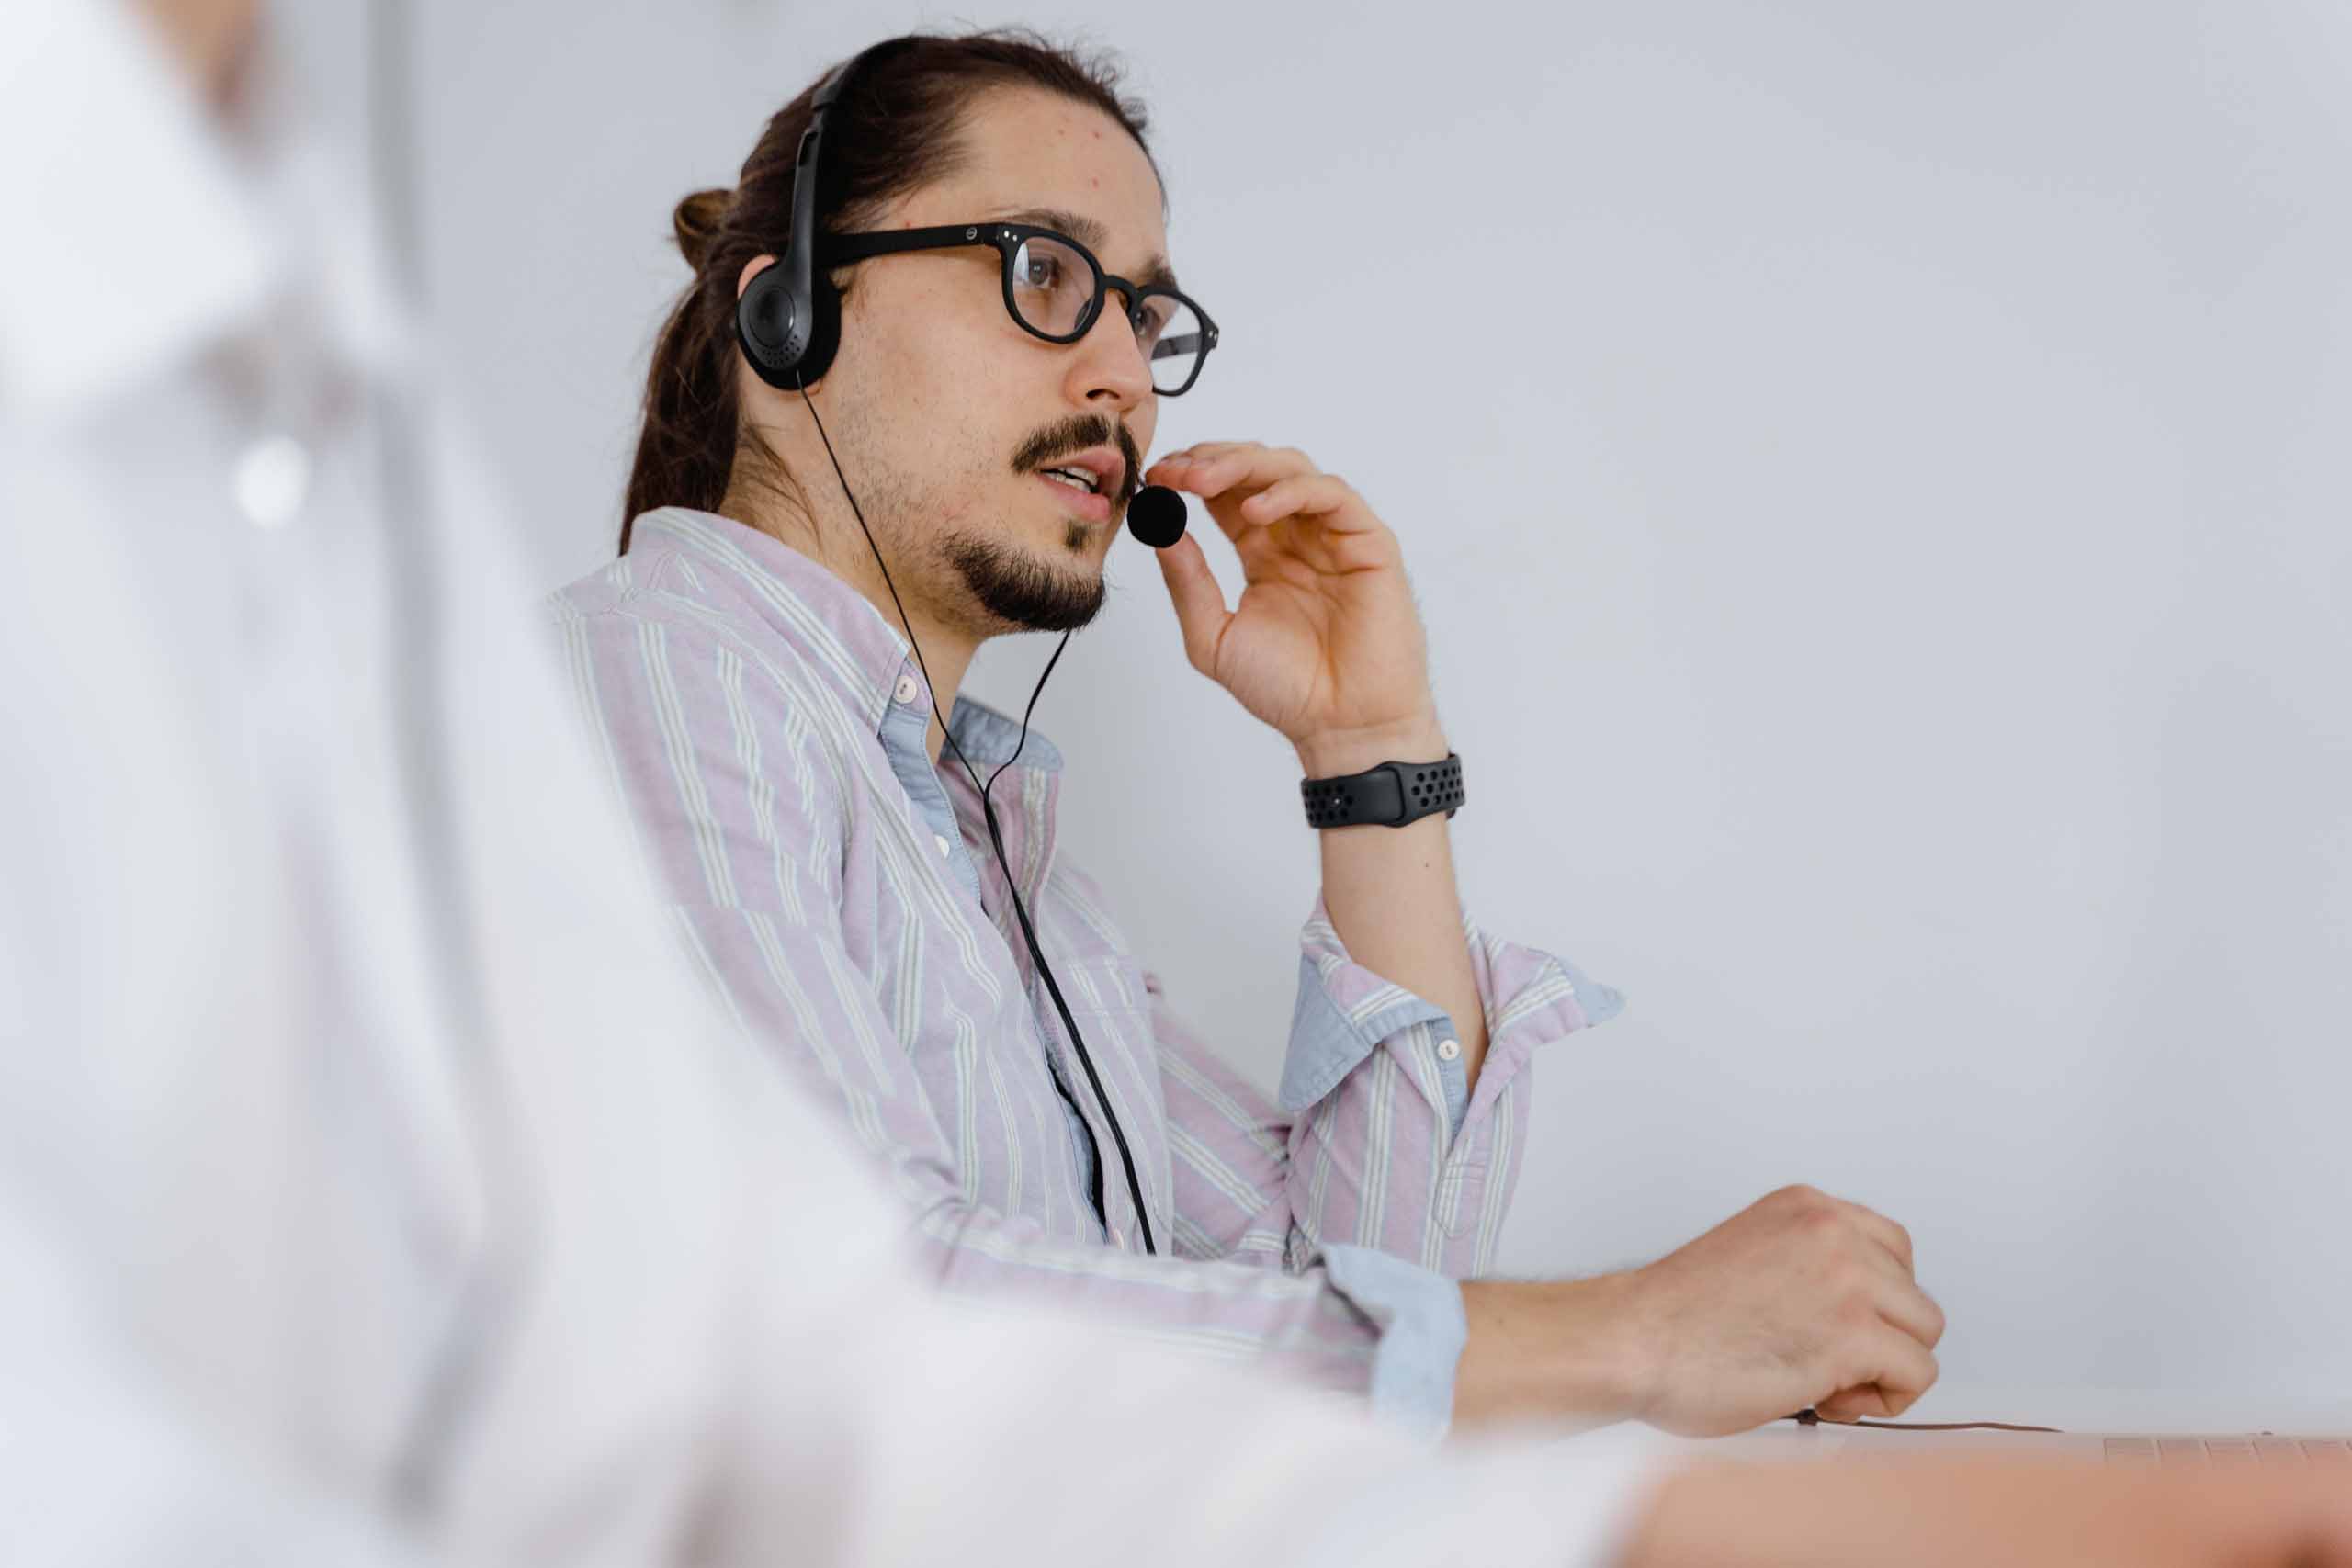 A customer service representative talking to someone through a telephone headset.